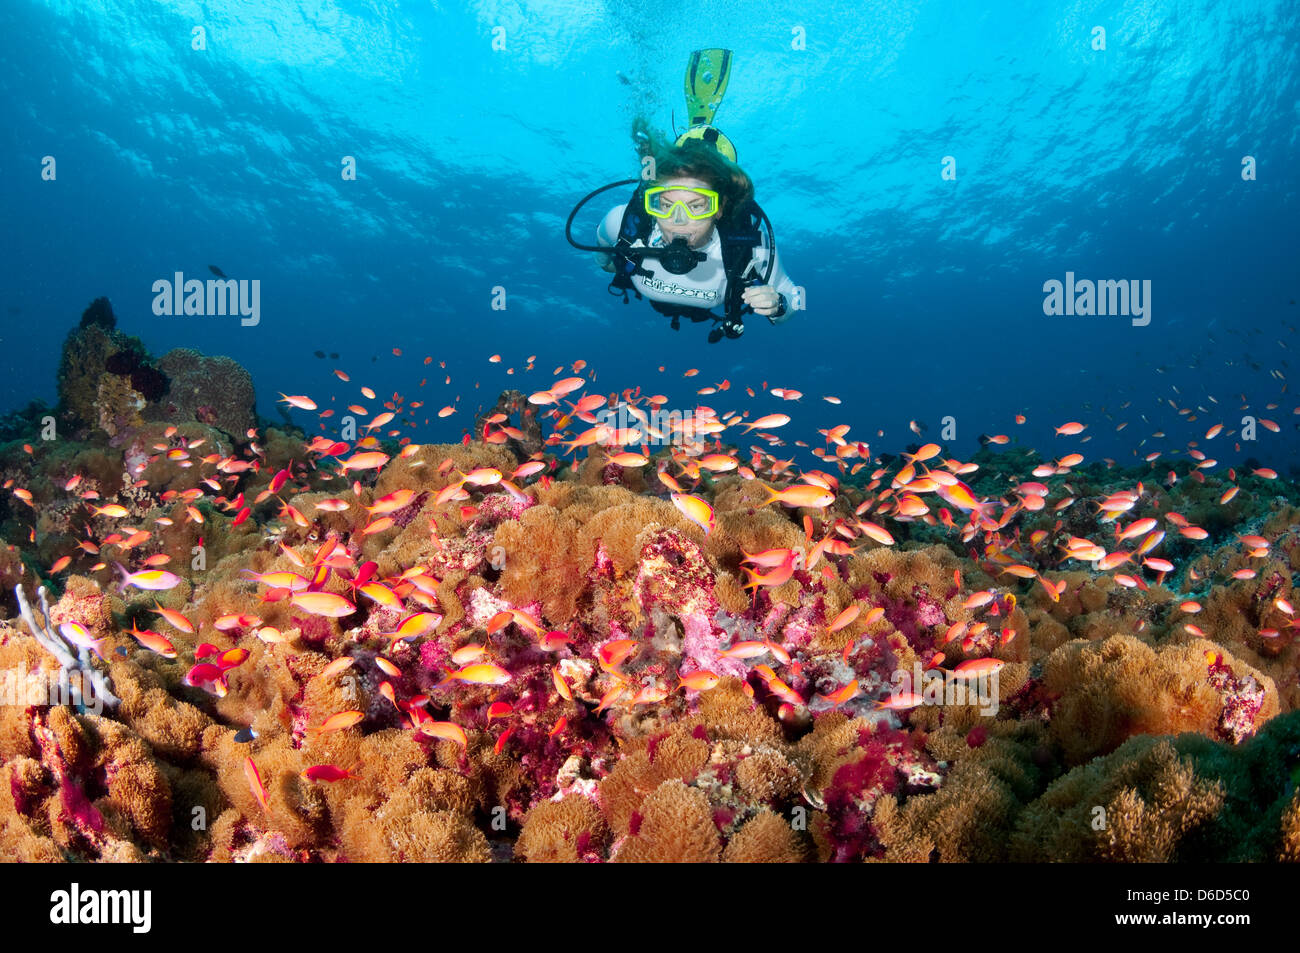 Scuba Diver explores a reef with hundreds of anthias fish Stock Photo